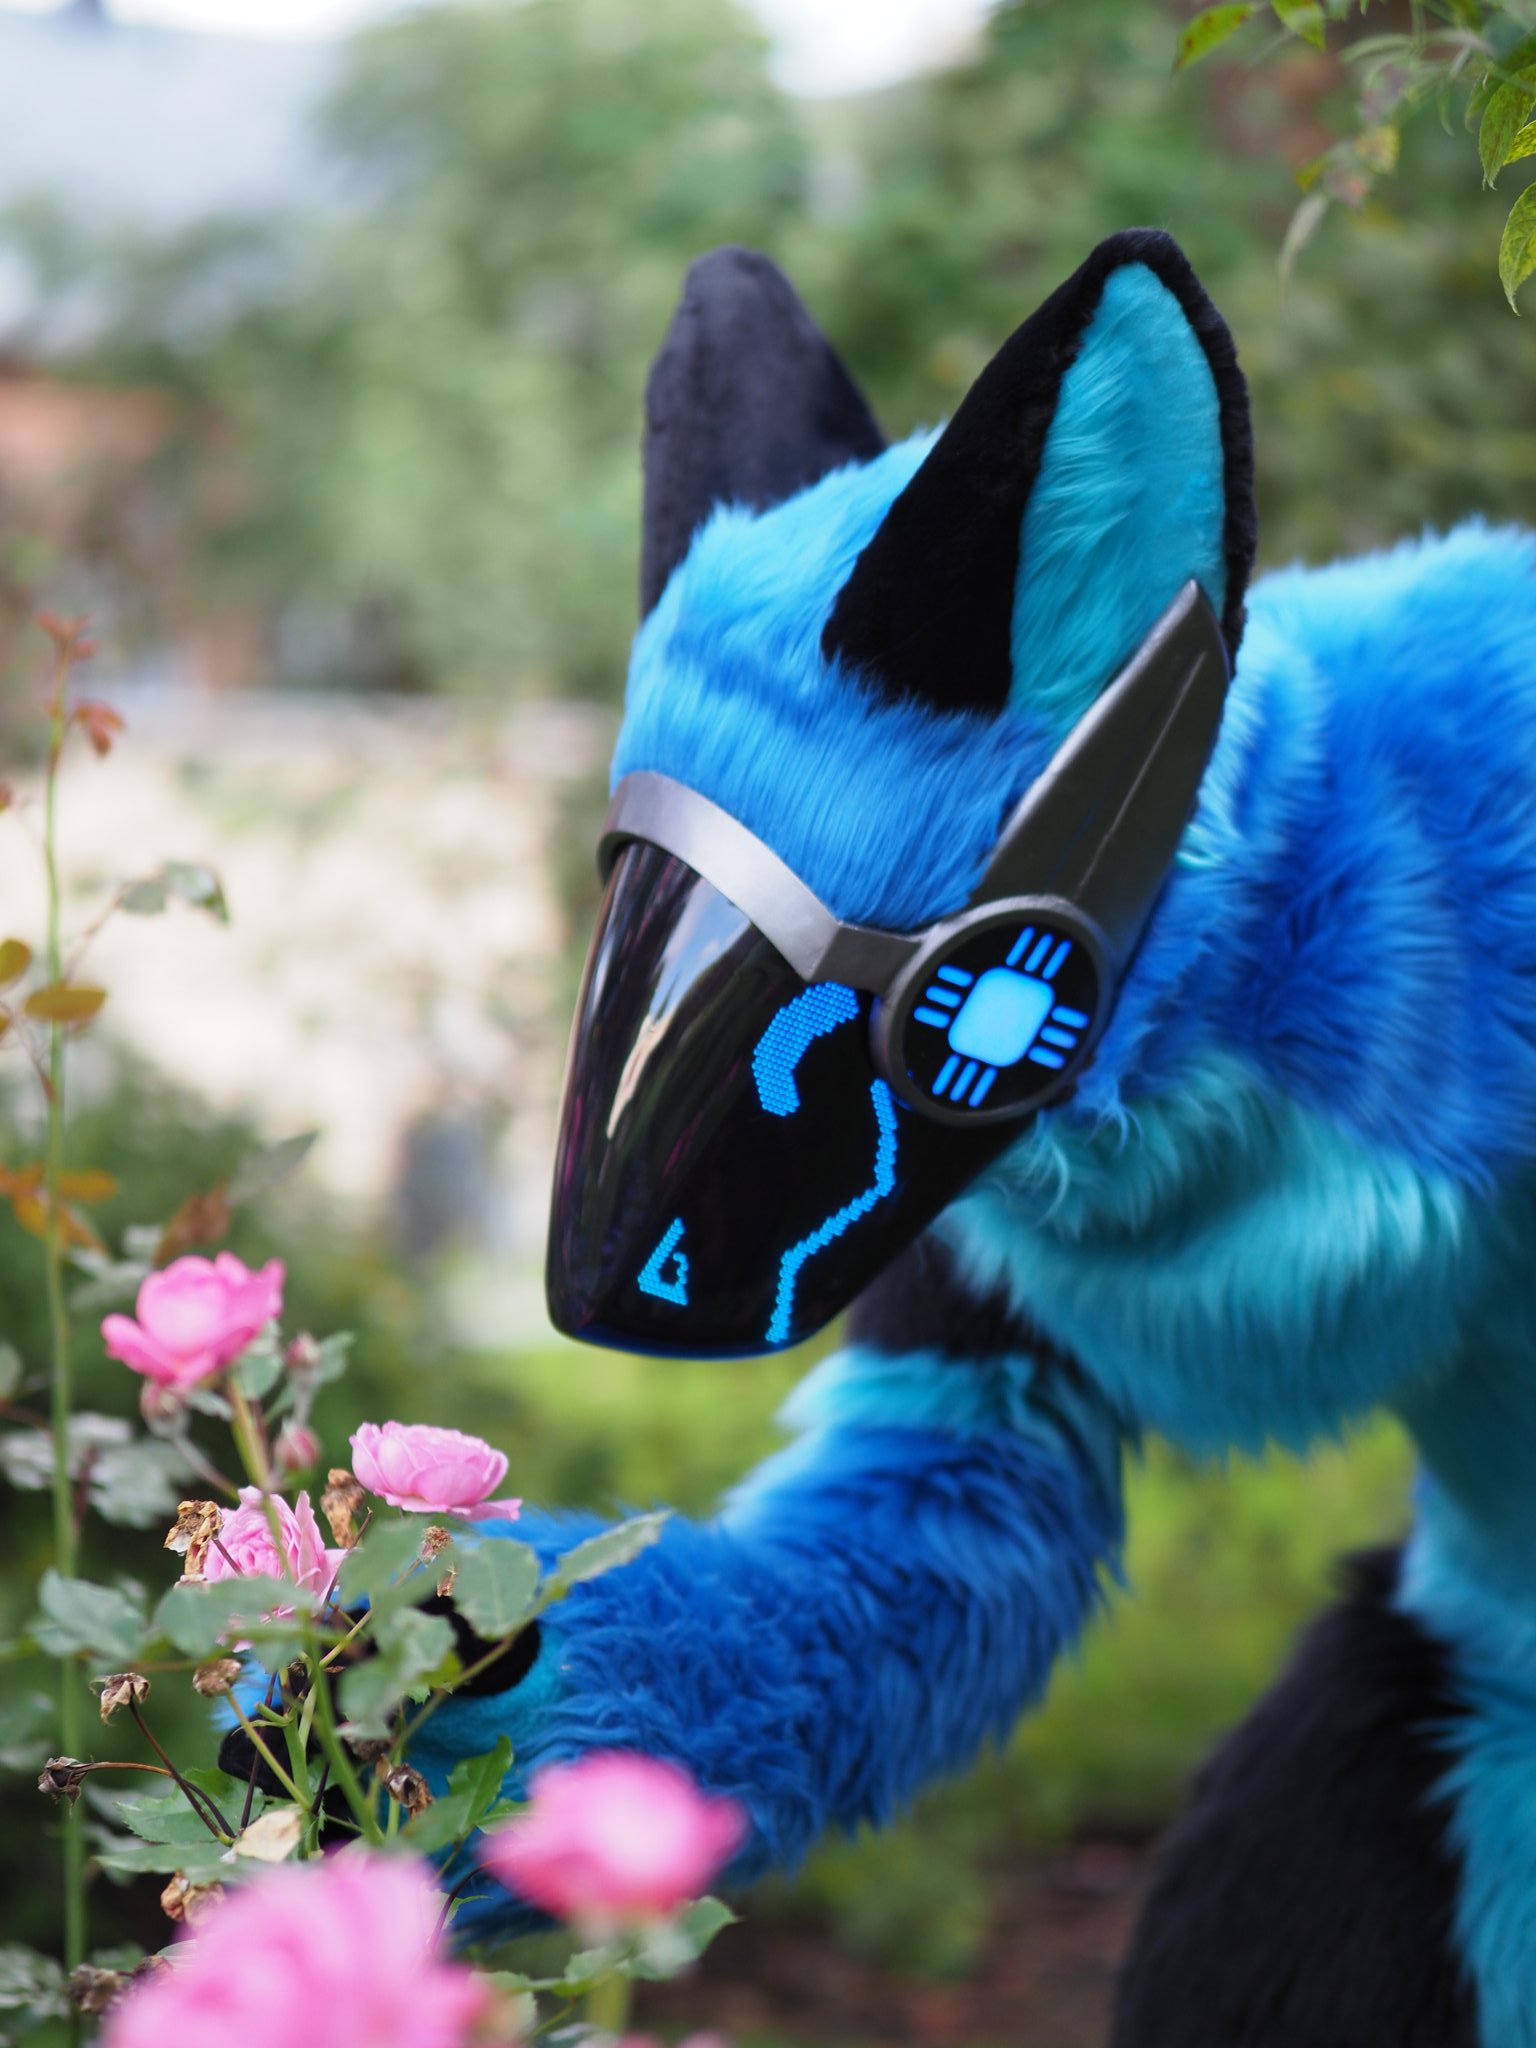 Bitti on X: Feeling cute this #fursuitfriday #furry #fursuit